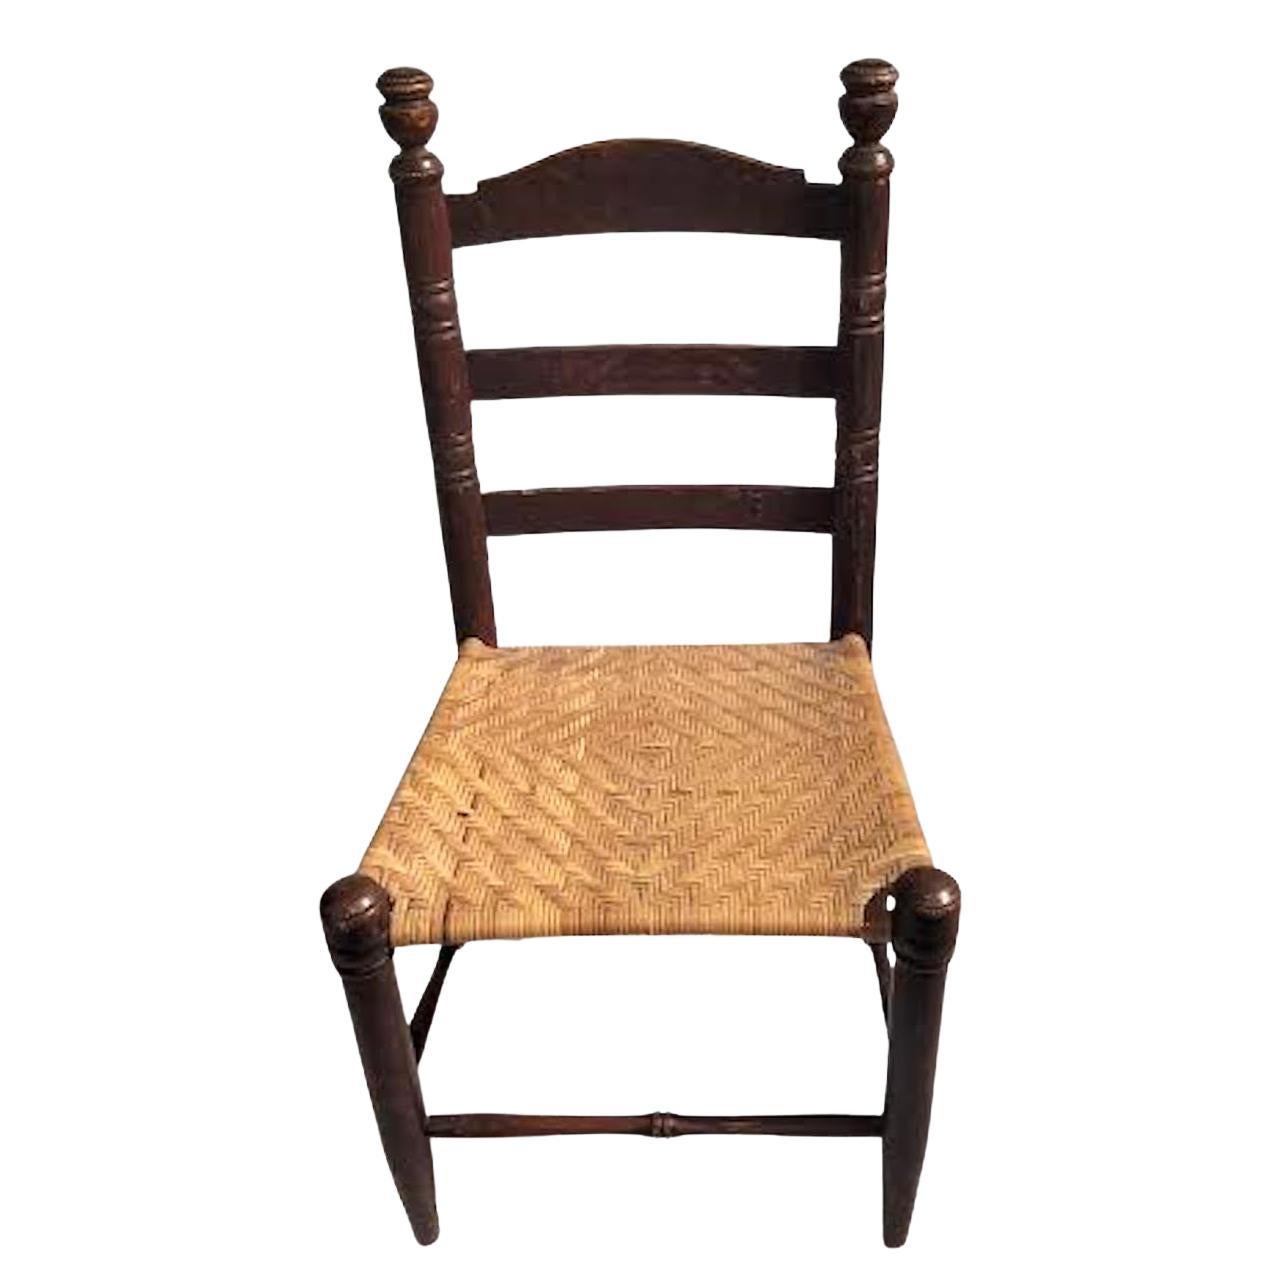 19th C Childs Ladder Back Chair with Original Rush Seat